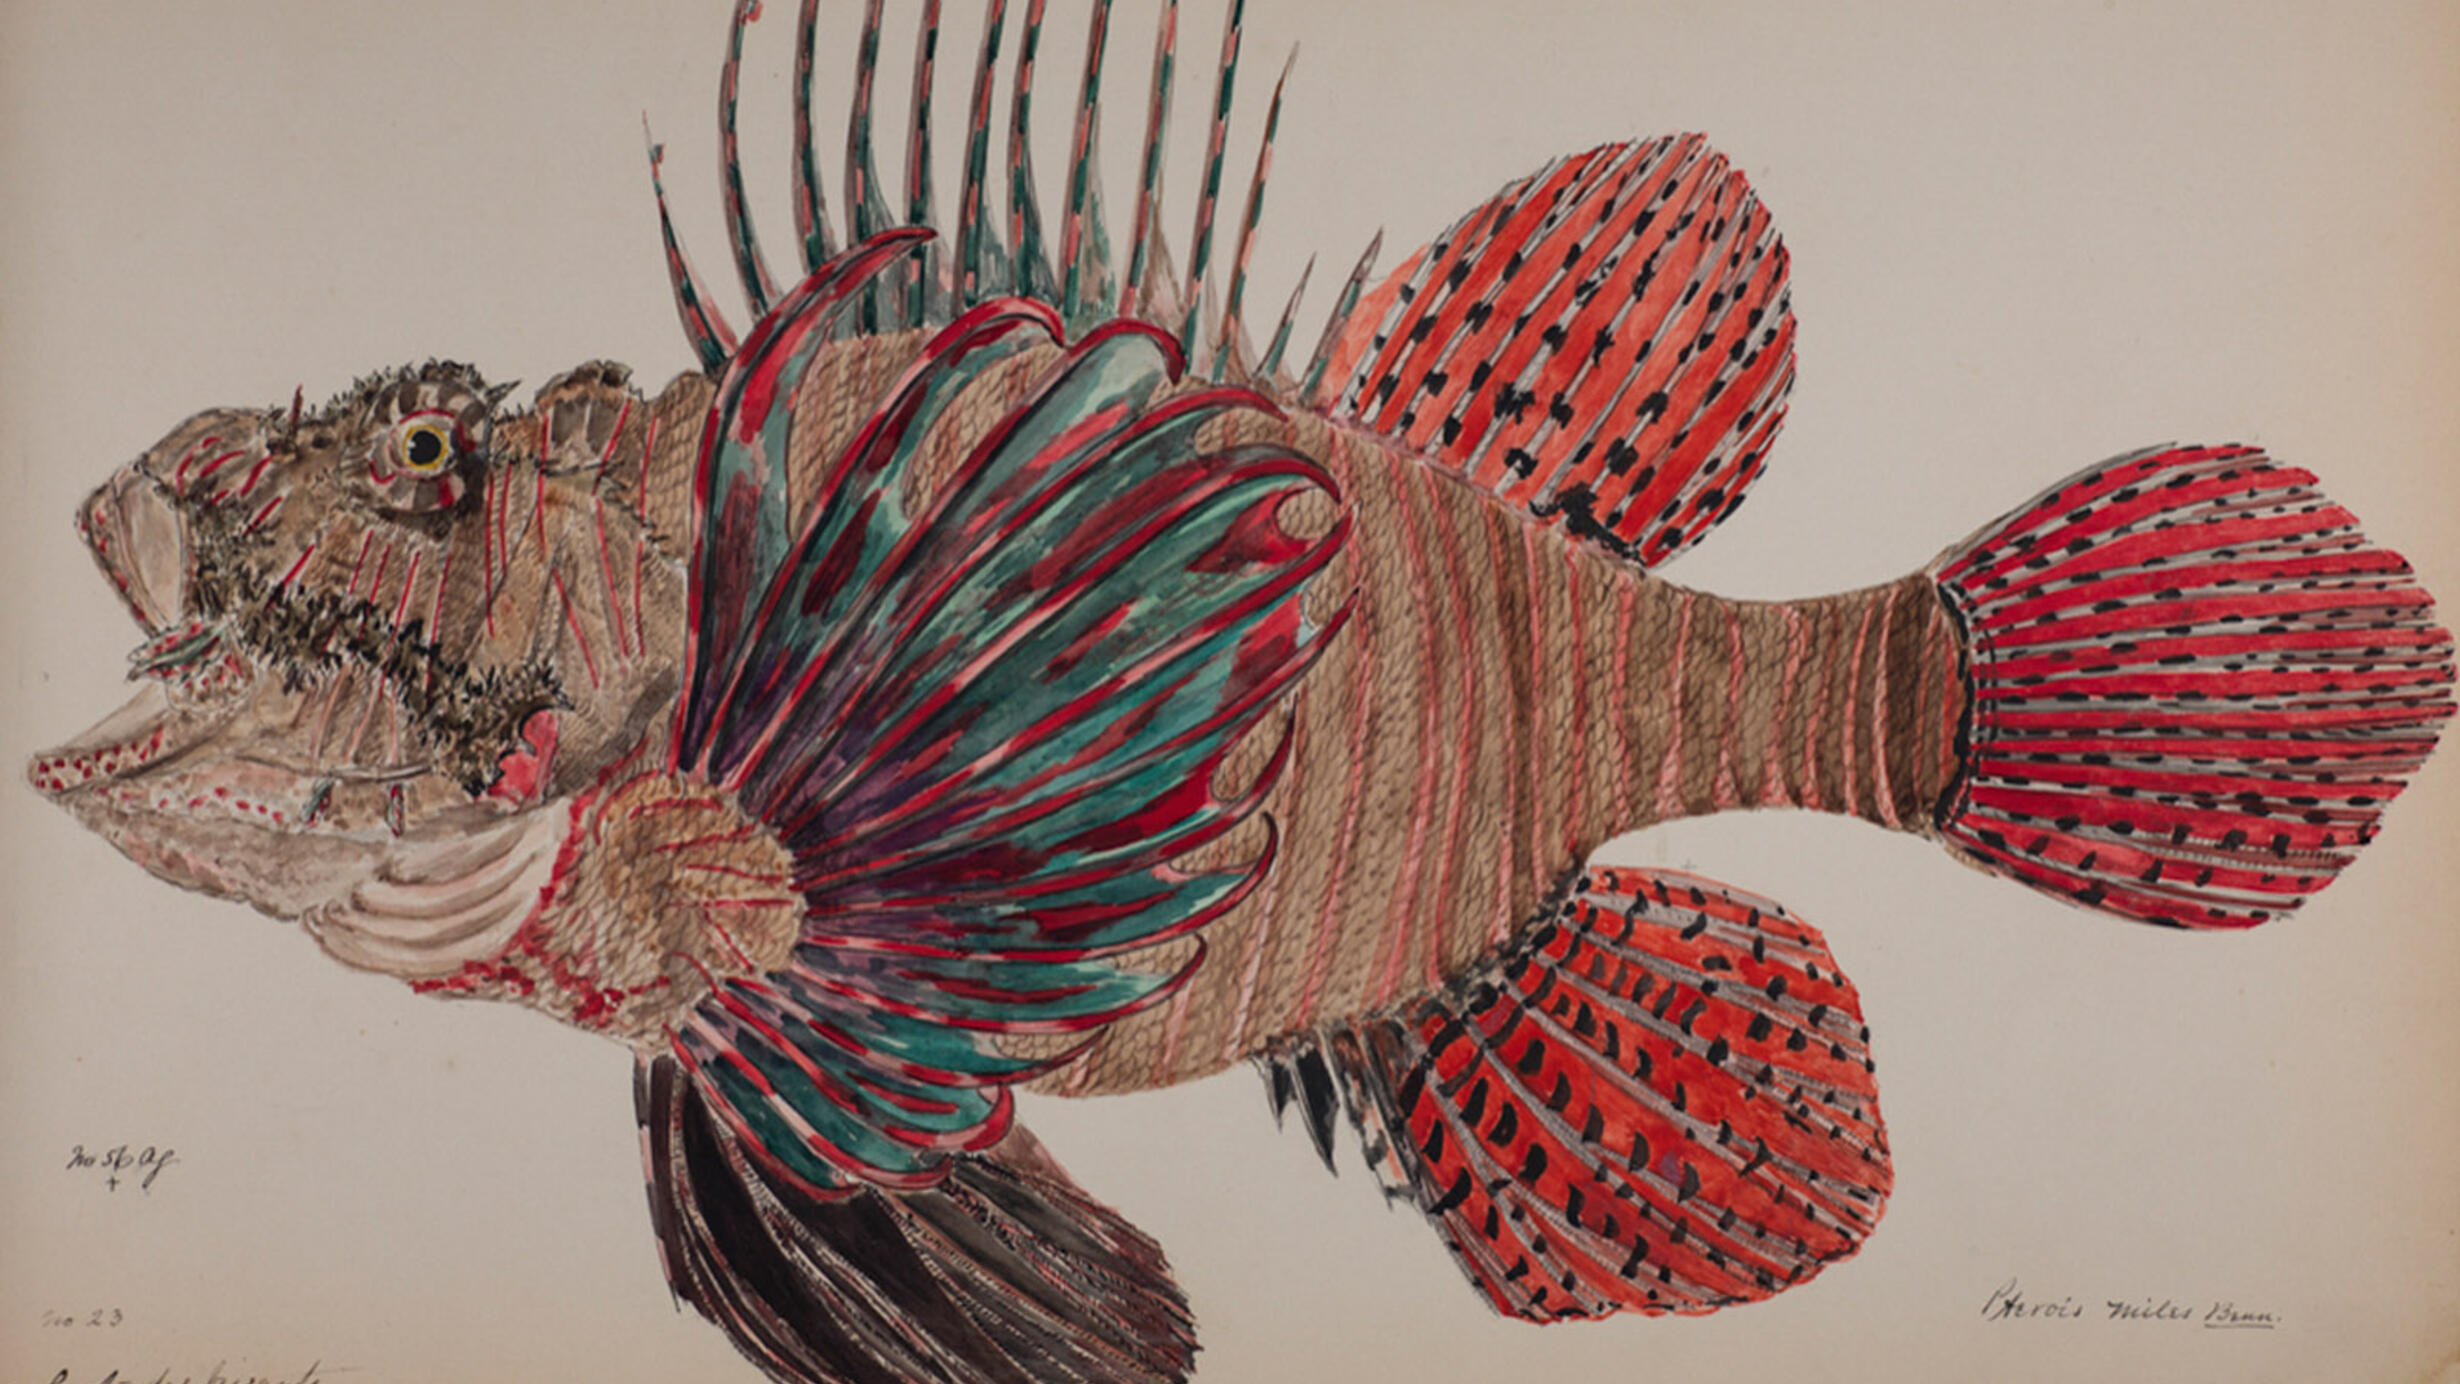 Brightly colored watercolor illustration of a lionfish from Nicholas Pike's work on fishes of Mauritius